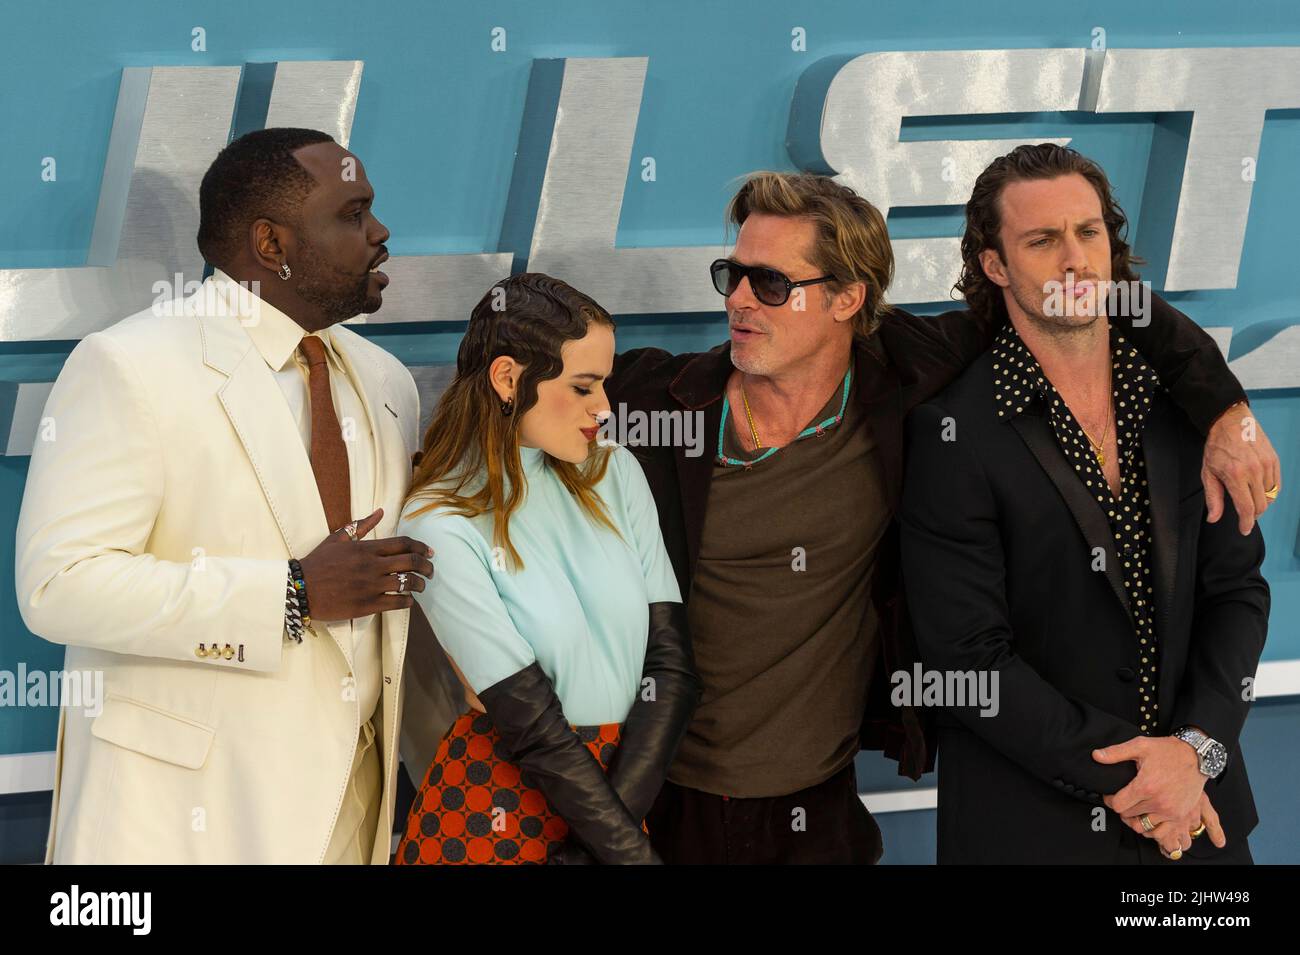 London, UK. 20 July 2022. Cast members (L to R) Brian Tyree Henry, Joey King, Brad Pitt and Aaron Taylor-Johnson attend the UK gala screening of the movie ‘Bullet Train’ at Cineworld Leicester Square.  Credit: Stephen Chung / Alamy Live News Stock Photo